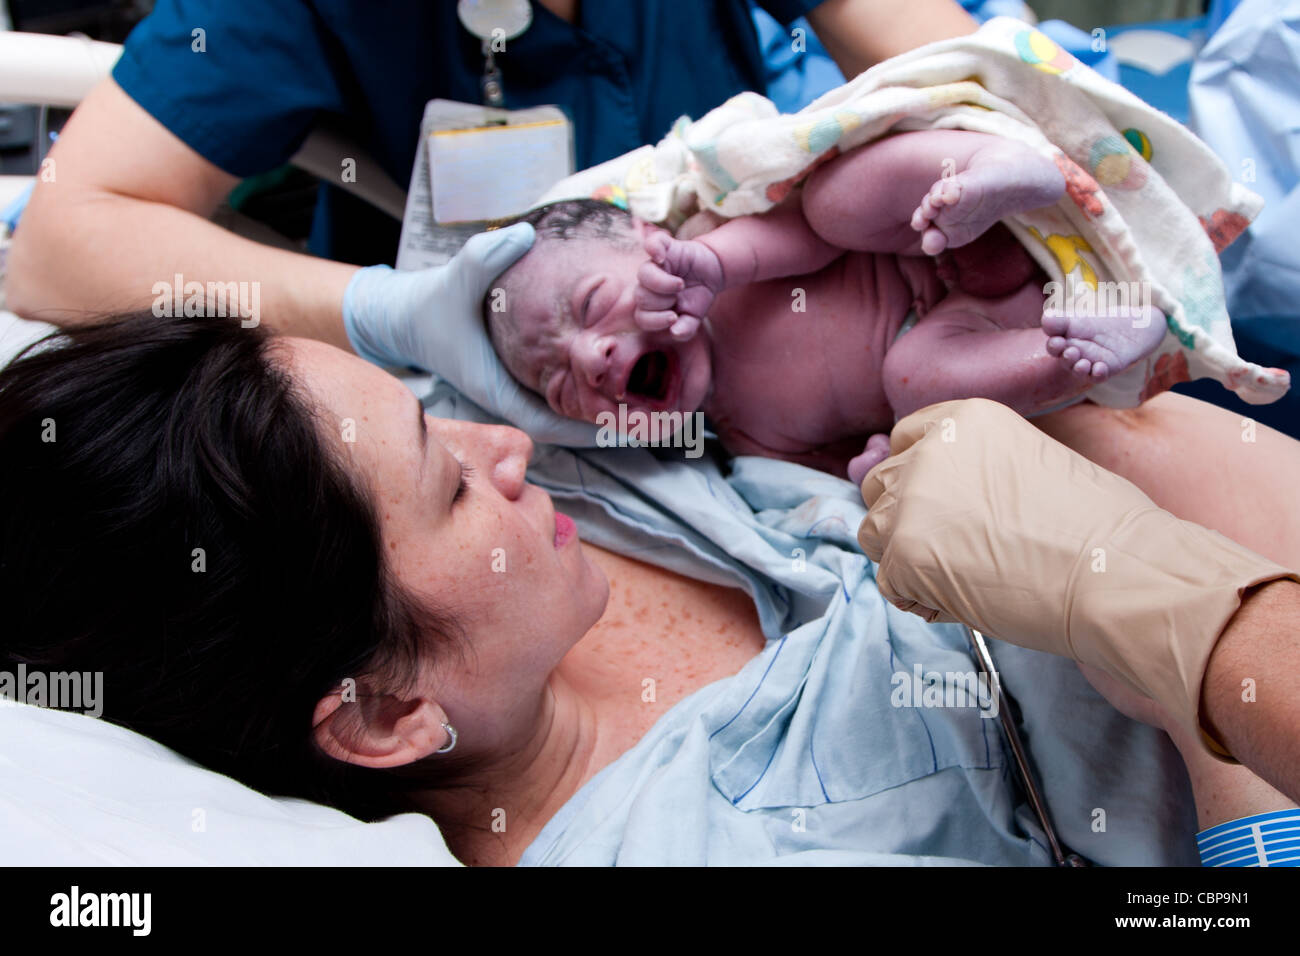 Mother in labor giving birth to baby new life in hospital. Infant covered in grease and lanugo is crying and held by nurses. Stock Photo